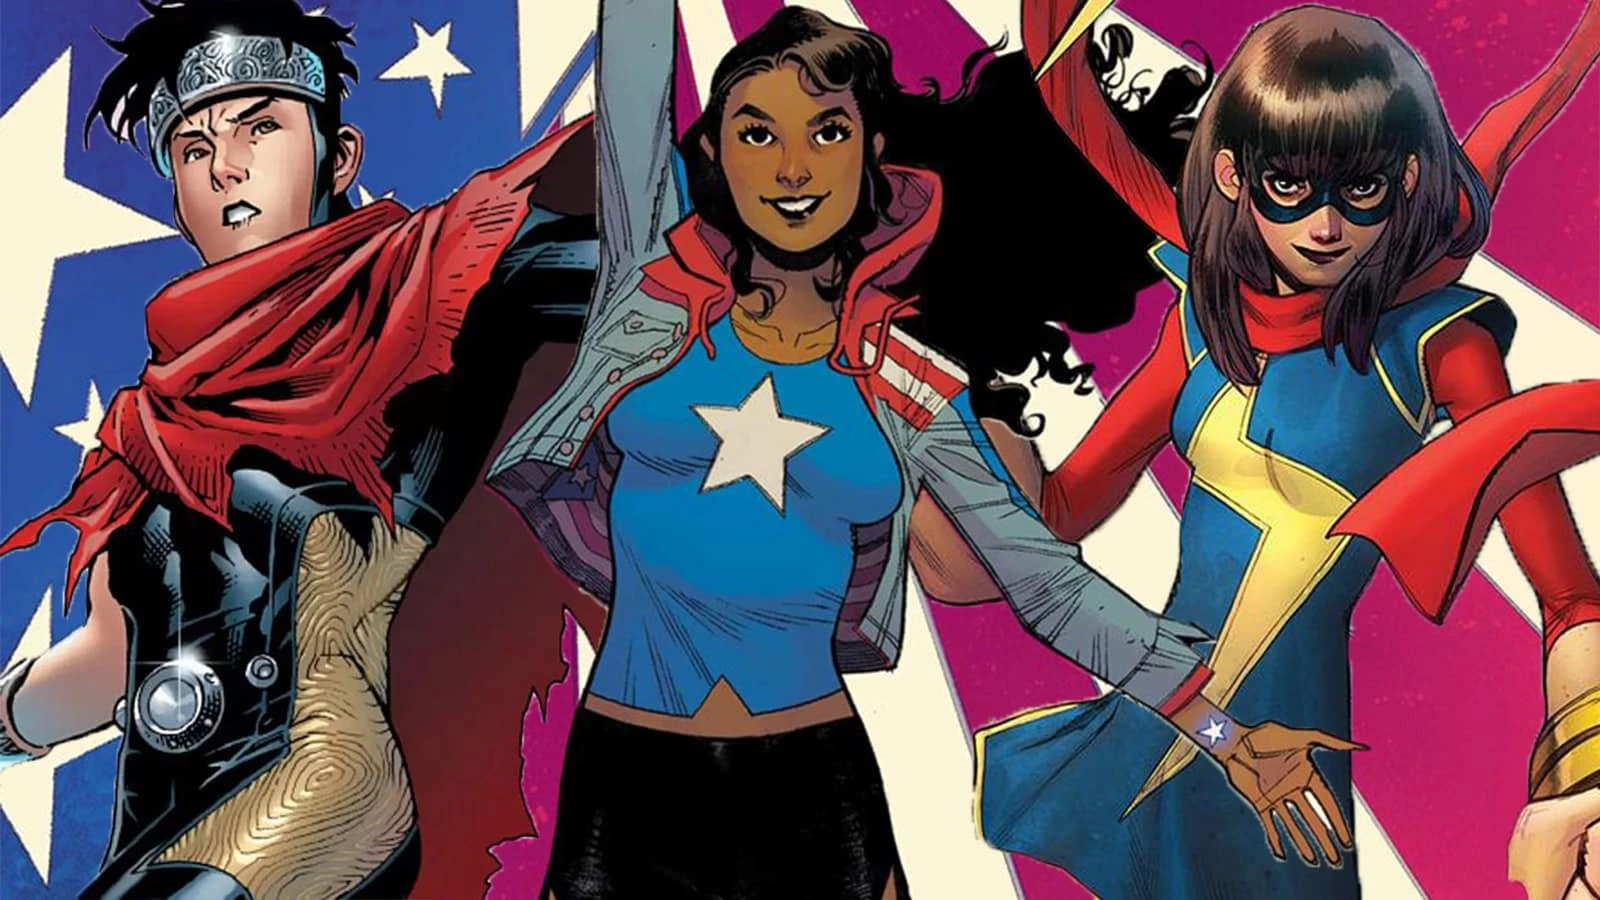 What Lies In Store For Ms. Marvel In The MCU?